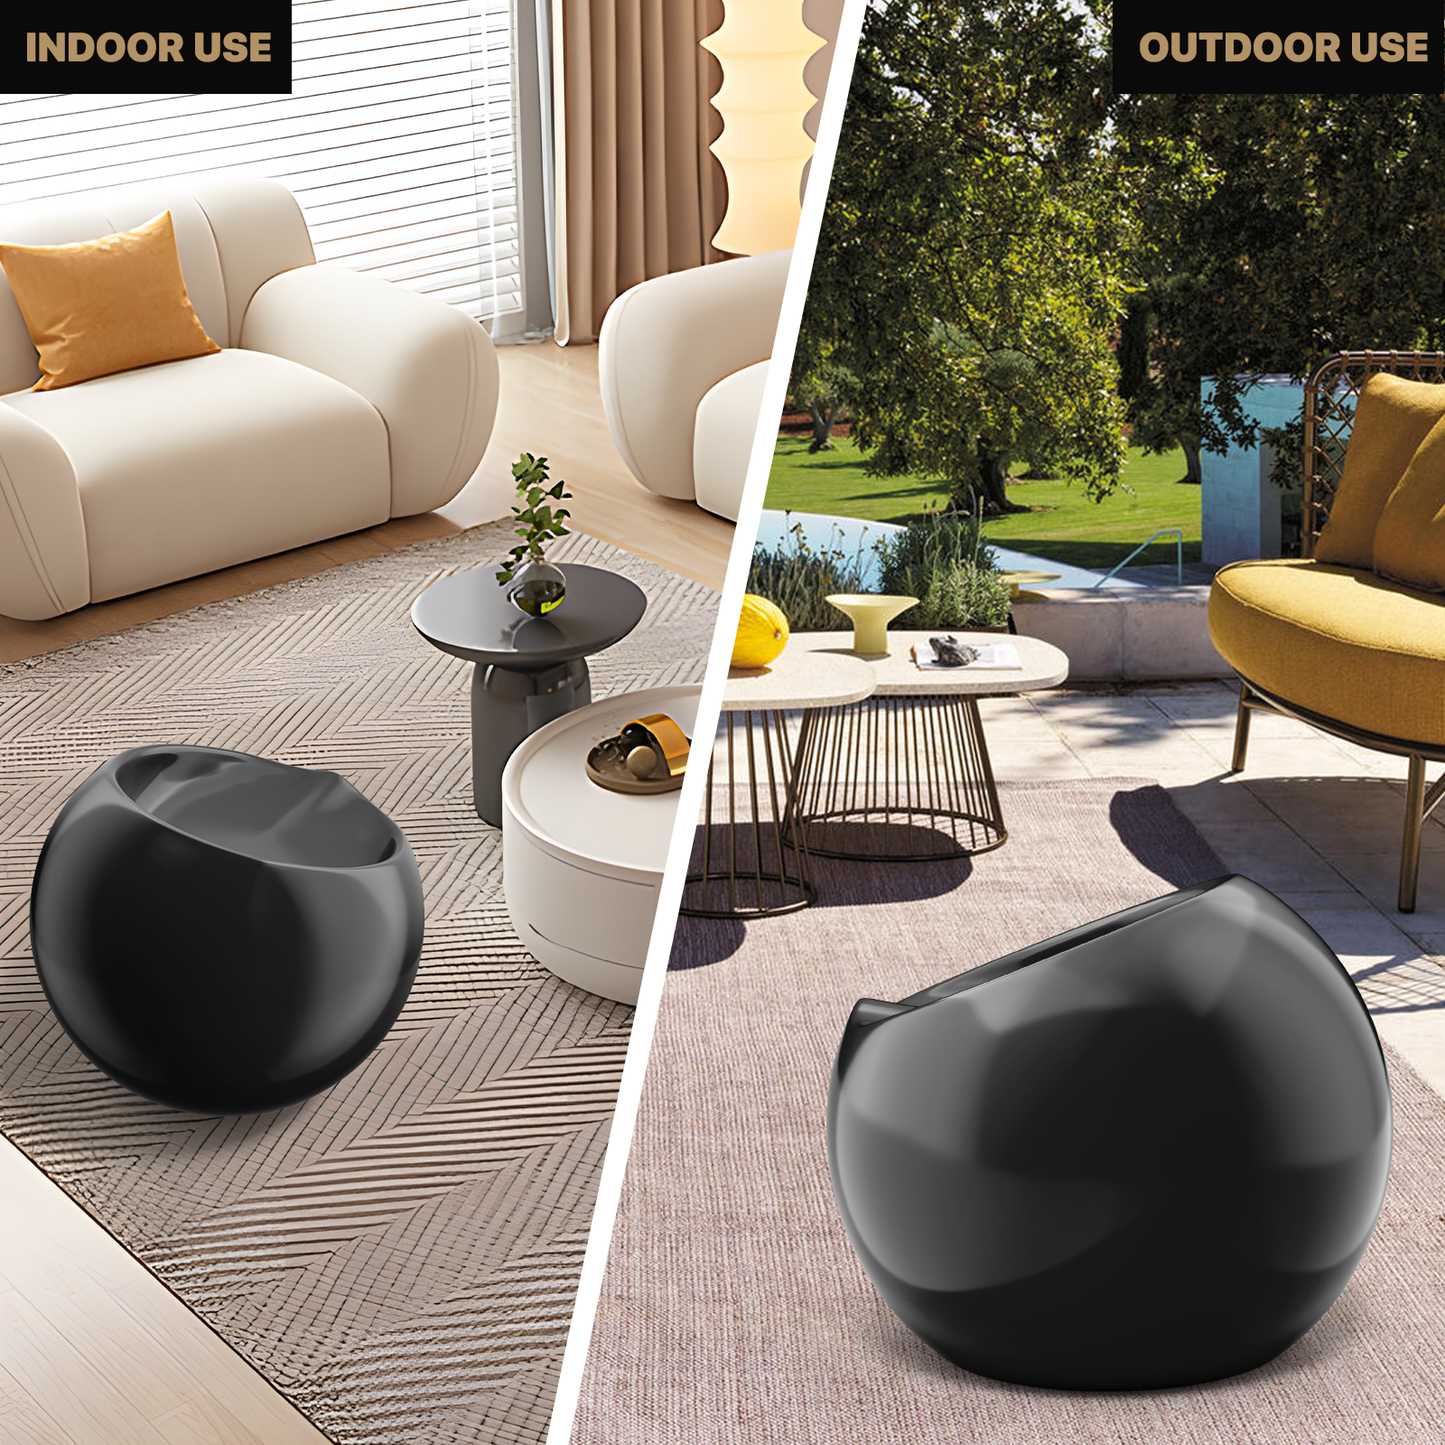 Outdoor Living Room Patio Night Club Bar Cocktail Kid Pouf Chair Ball Seat Black